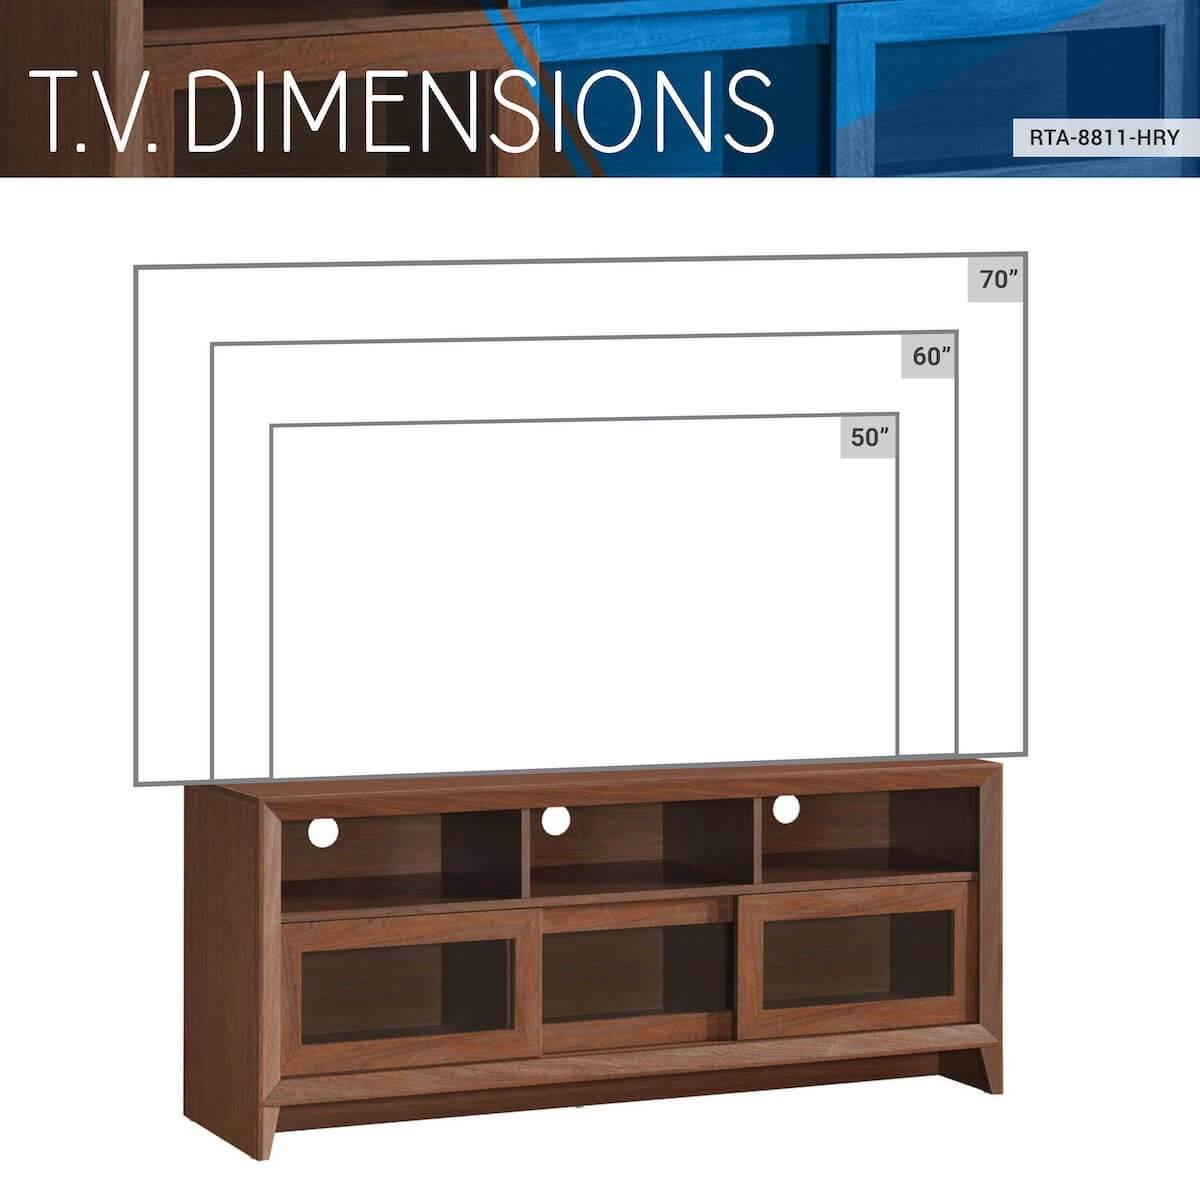 Techni Mobili Hickory Modern TV Stand with Storage for TVs Up To 60" RTA-8811-HRY TV Dimensions